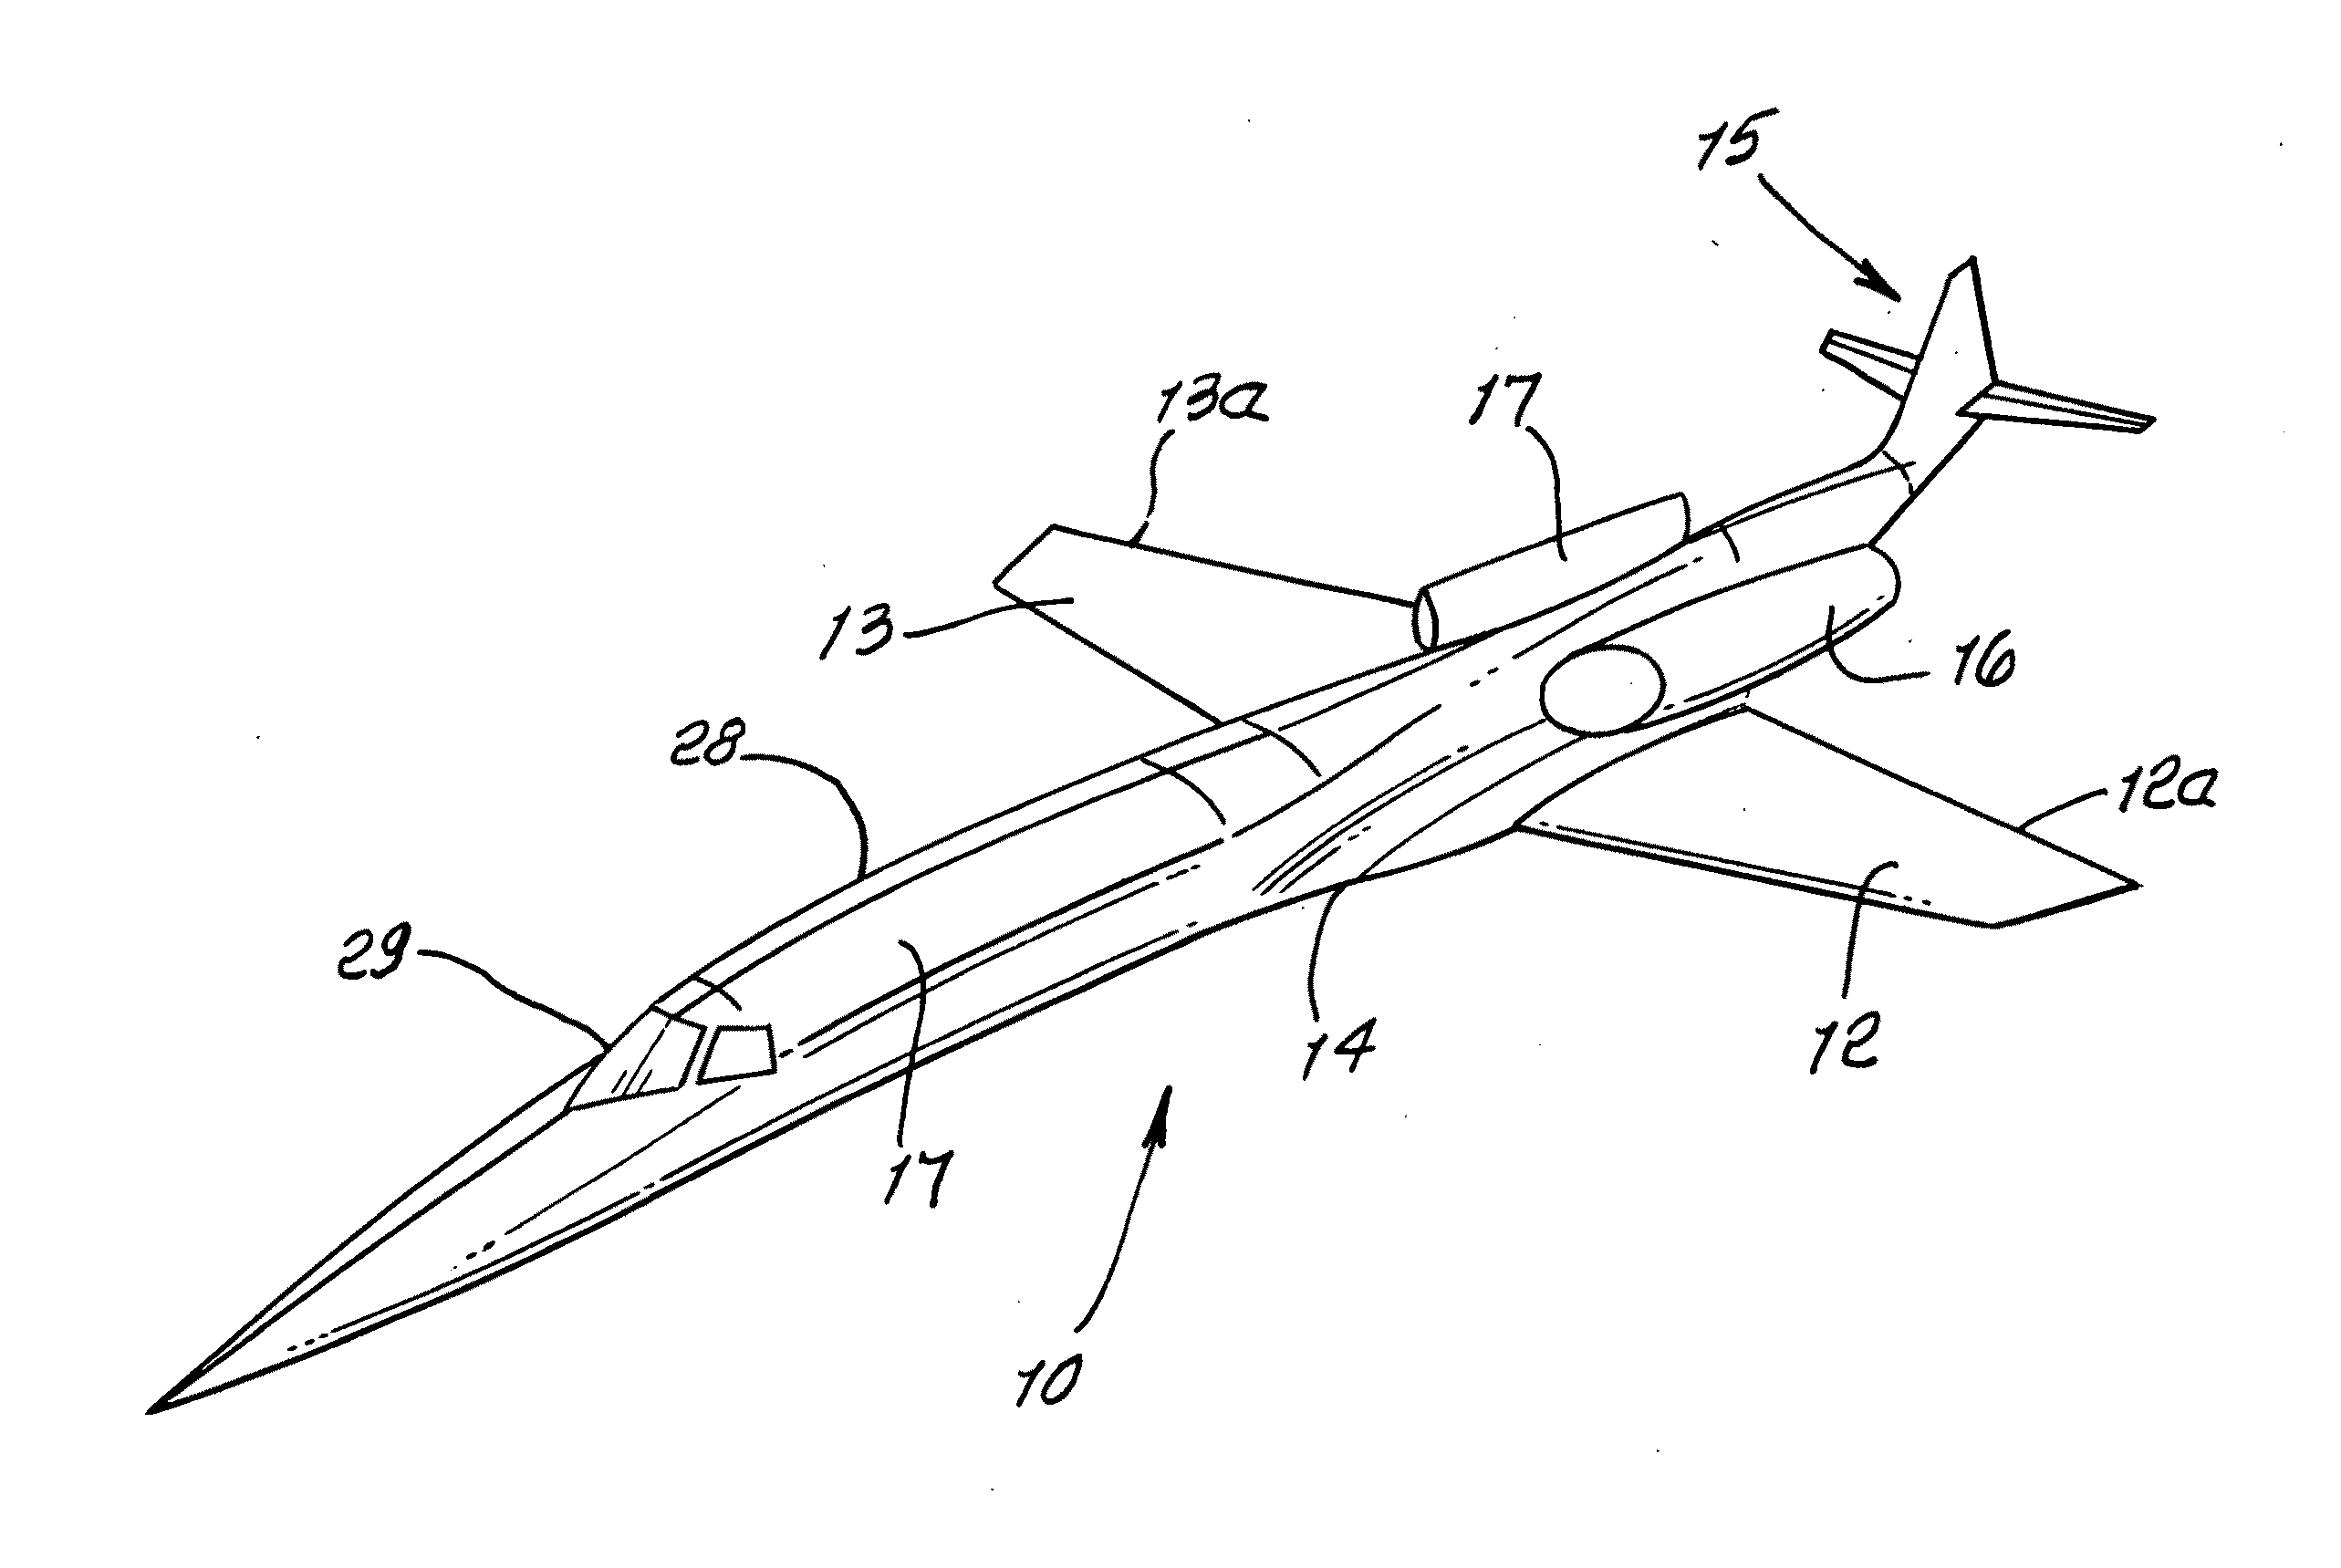 Laminar flow wing optimized for supersonic cruise aircraft